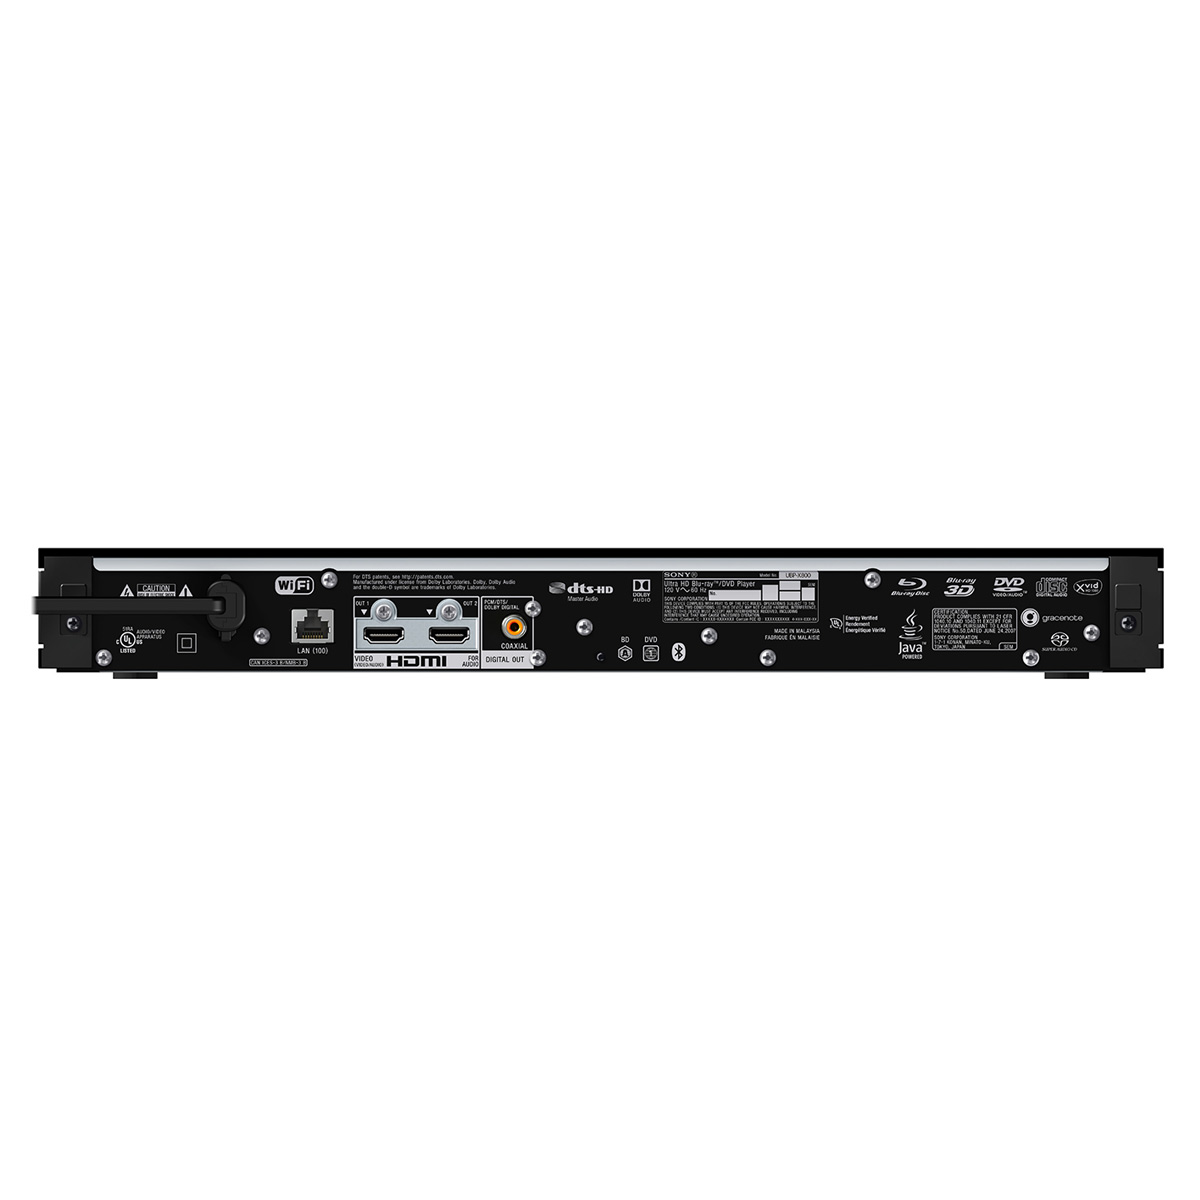 Sony UBP-X800M2 4K Ultra HD Home Theater Streaming Blu-Ray Player with High-Resolution Audio and Wi-Fi Built-In - image 5 of 6